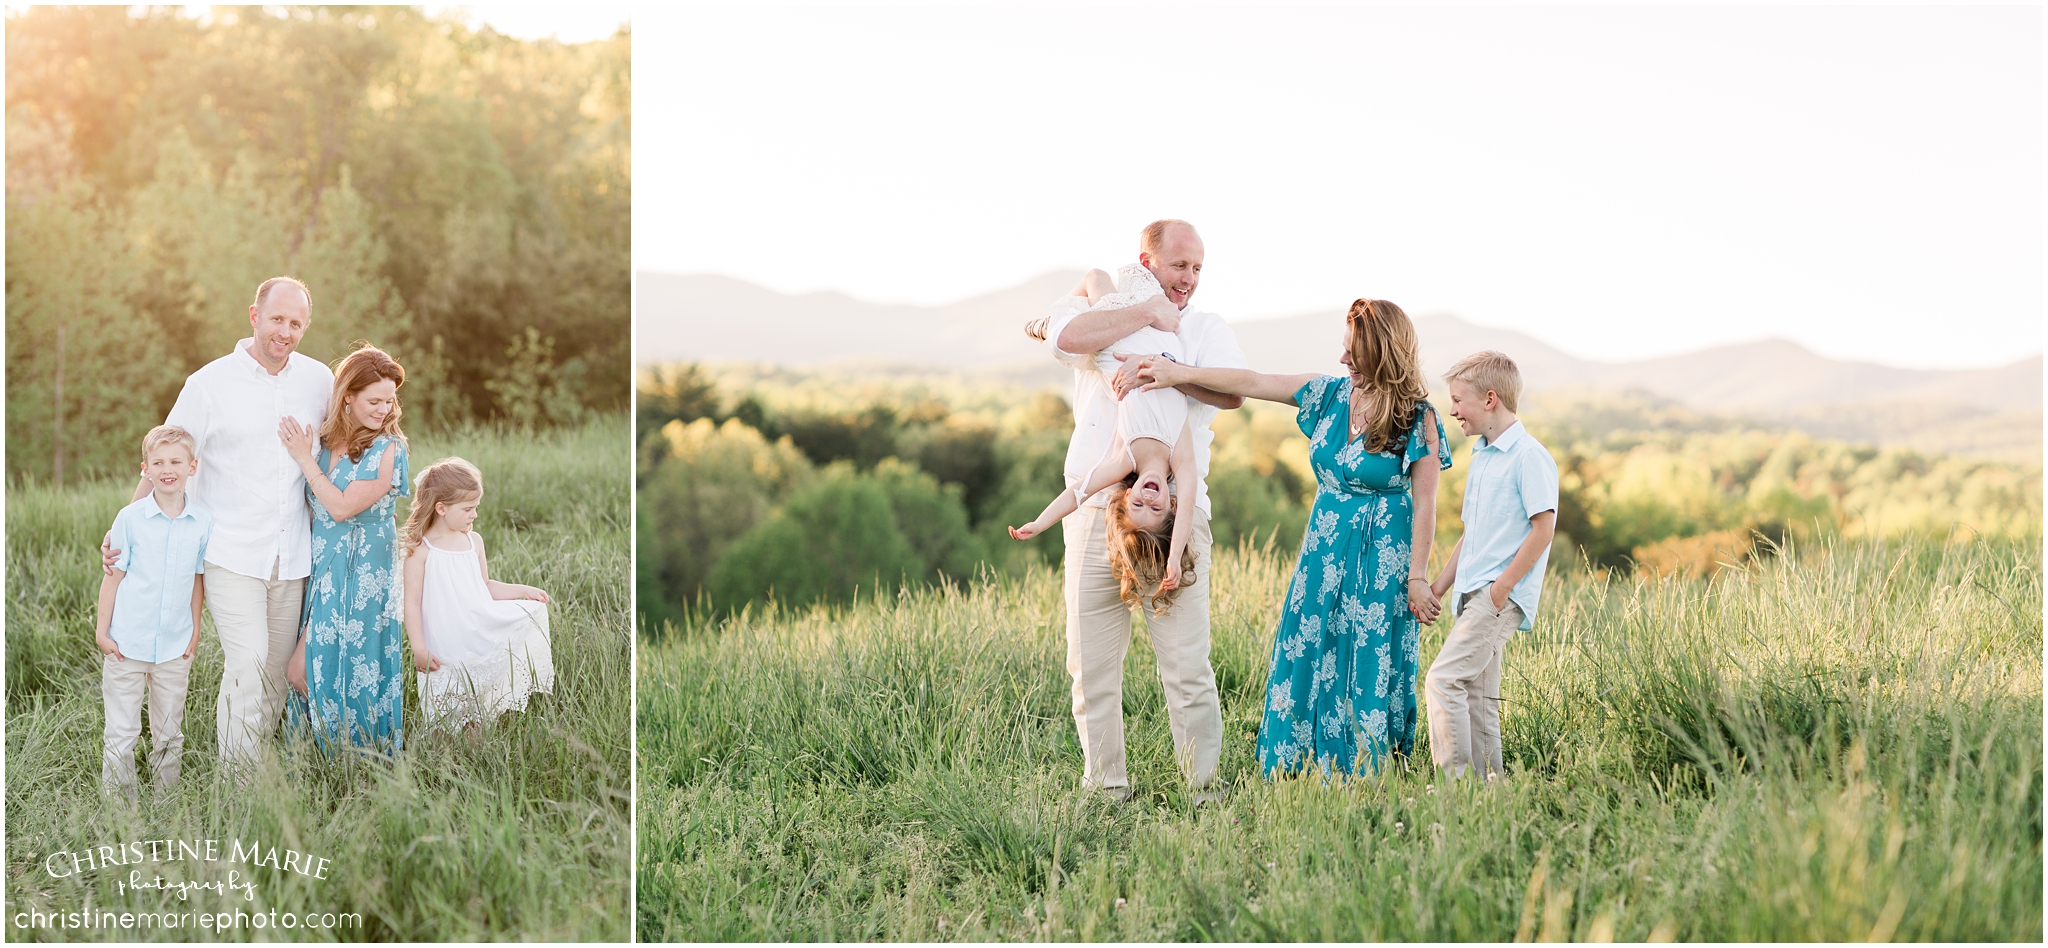 playful family photos in the north georgia mountains 